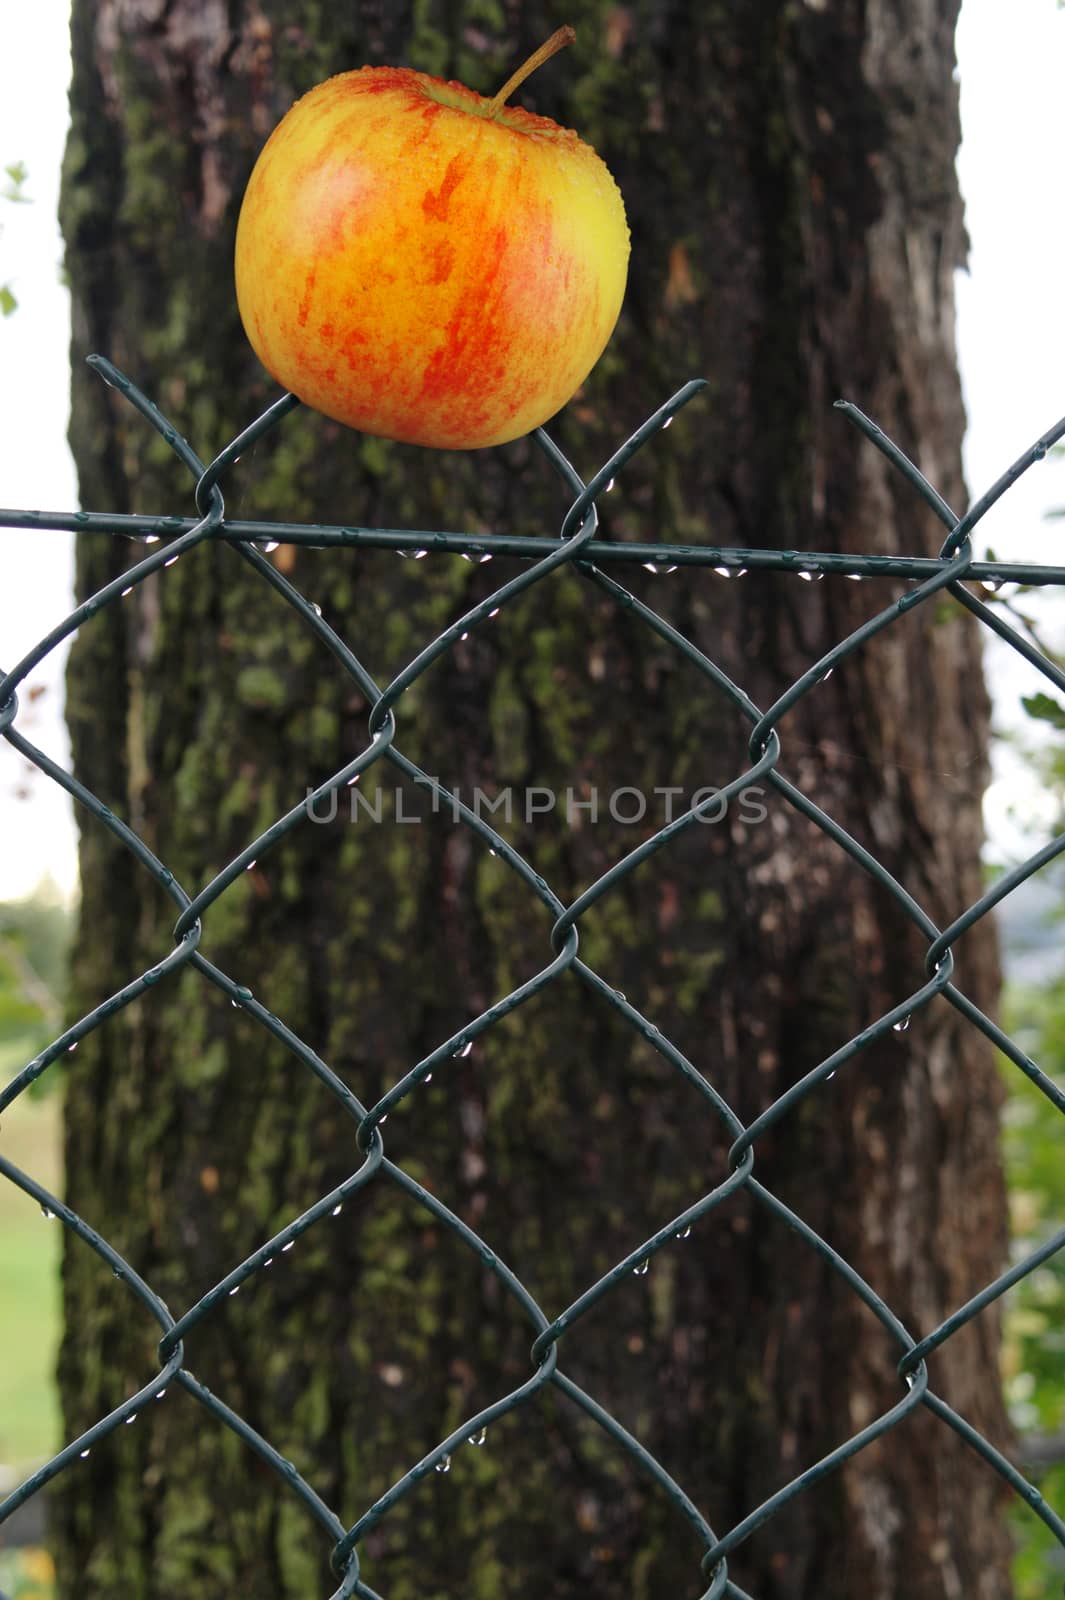 apple on a wire fence